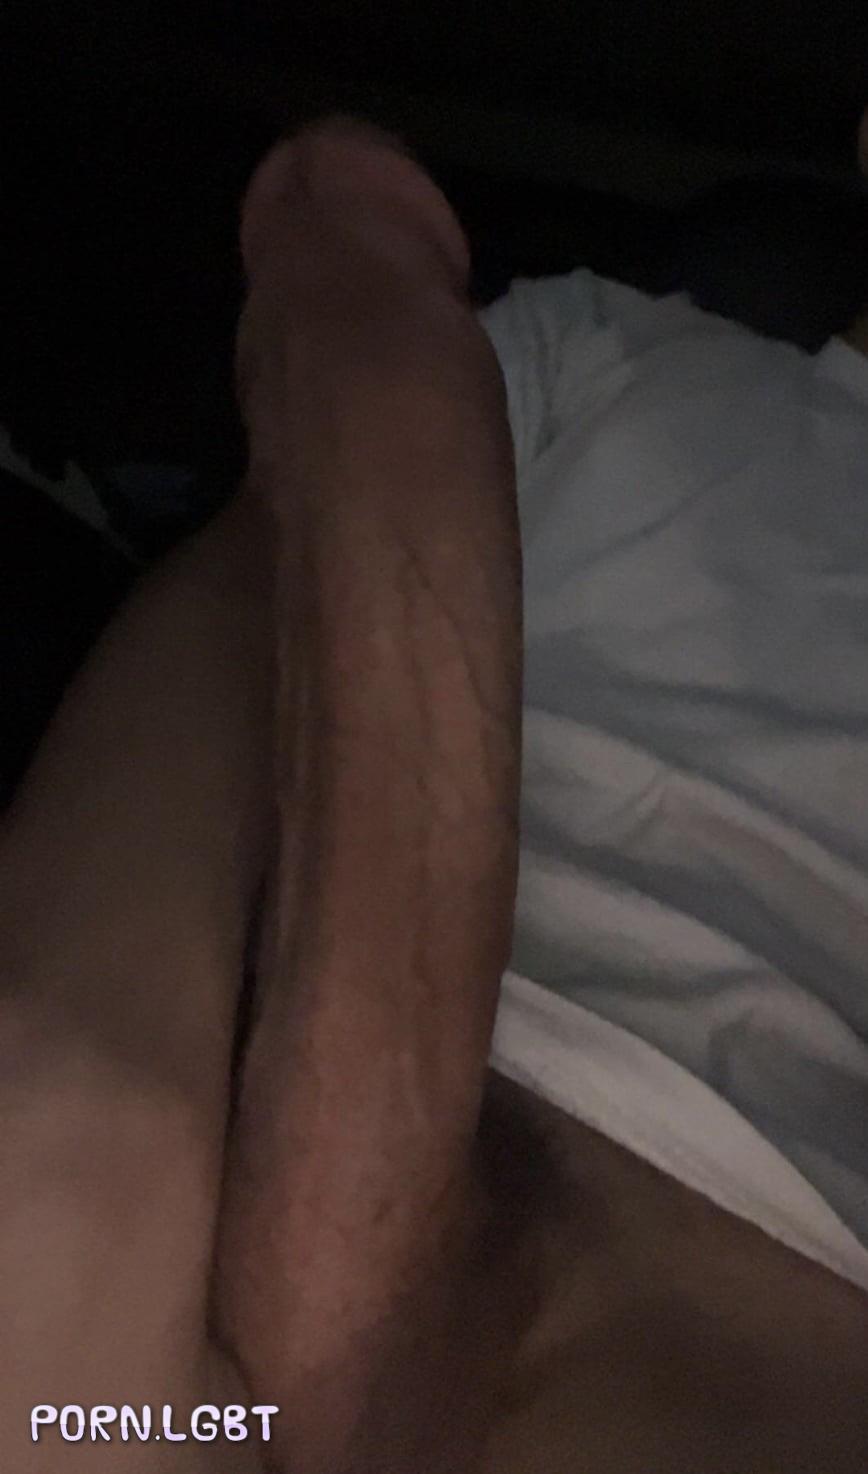 Who wants to get face fucked